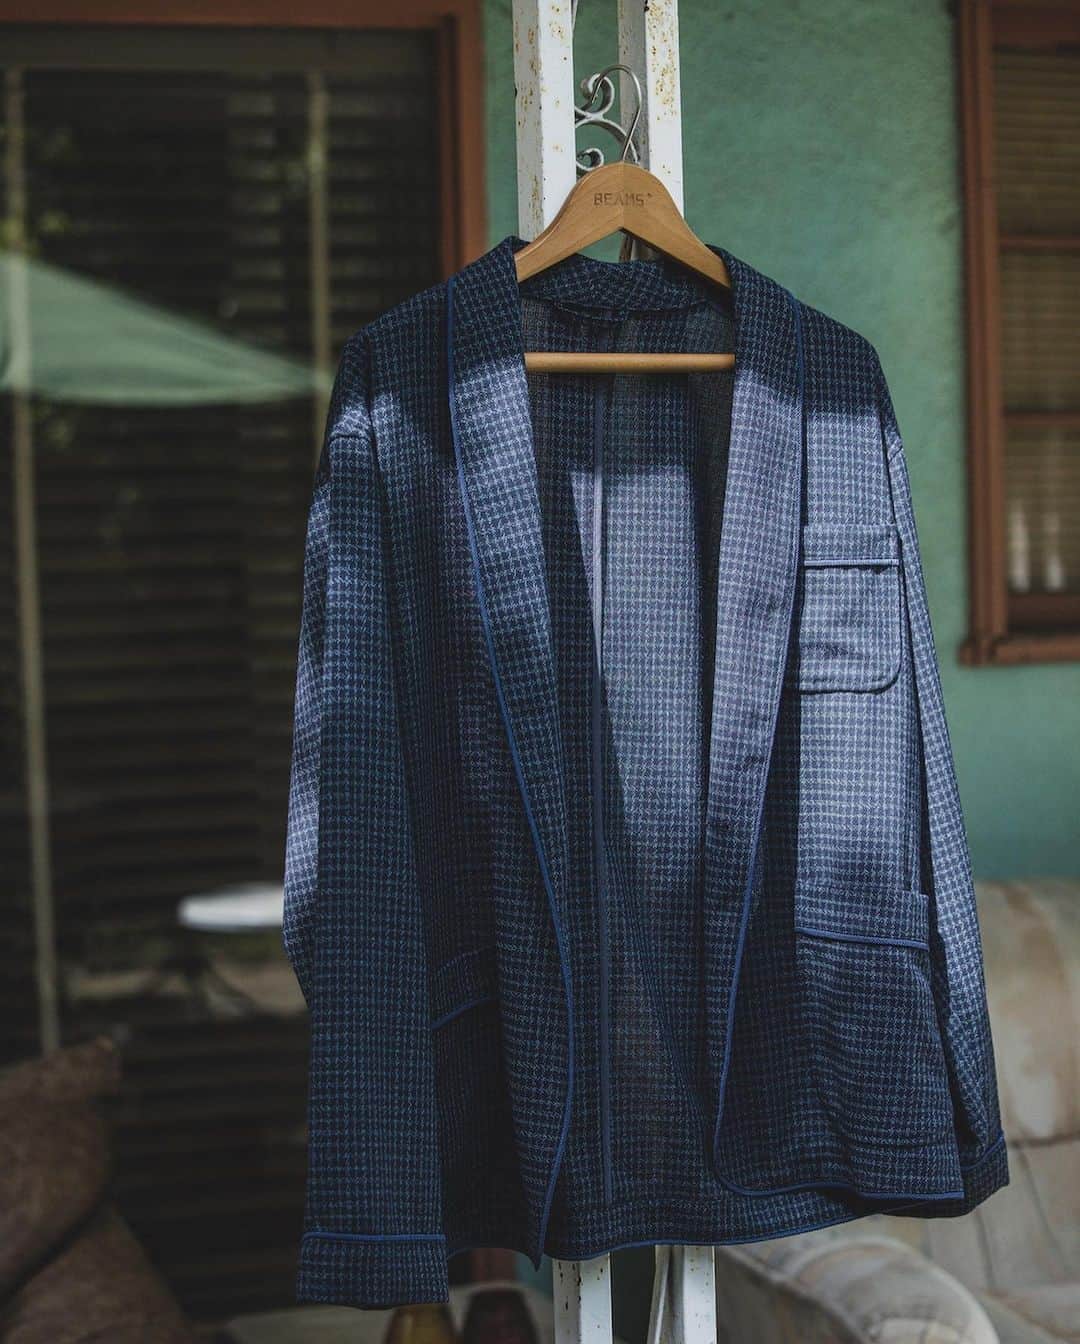 BEAMS+さんのインスタグラム写真 - (BEAMS+Instagram)「… “A smoking jacket” It sounds a bit difficult to approach, but it is actually a kind of elegant jacket worn on formal occasions.  It’s also called a tuxedo or dinner jacket. Gentlemen who enjoyed smoking in a cozy place would surely have worn it in a relaxing way. The pants paired with this jacket are inspired from the design of military pajama pants. The pocket details have been updated to make them easy to wear as a casual wear. A Panama weave material made from wool adds a refreshing look and its rough surface allows for excellent breathability. A high-twisted triplet yarn made of 2/60 wool yarns also makes it luxurious and dry touch.  Enjoy a classy style with this set-up that combines relaxation and elegance.  スモーキングジャケットって、名前はちょっと近寄り難いけど・・・、フォーマルな場で着用される、エレガントなジャケットの一種。スモーキングジャケットの別名はタキシードや、ディナージャケットって呼ばれることも。 くつろいだ場所で煙草を嗜む紳士は、きっとリラックススタイルとして着用していたはずである。 合わせたパンツは、ミリタリーのパジャマパンツがデザインモチーフ。タウンユースにも着用しやすいようにと、ポケットディテールをアップデート。  見るからに涼しげな素材使いは、ウールを原料にしたパナマ織。粗めな素材の表面、通気性も抜群。ドライなタッチは2/60のウール糸を三子糸に強撚したなんとも、贅沢なパナマ素材。リラックス&エレガンスを兼ね備えたセットアップで、上品なスタイルを楽しんでみては。 . Jacket_1B Smoking Jacket Wool Panama Shirt_Ikat Madras Band Collar Pullover Shirt Pants_MIL Easy Pants Wool Panama . @beams_plus @beams_plus_harajuku @beams_plus_yurakucho #beamsplus」4月27日 19時54分 - beams_plus_harajuku